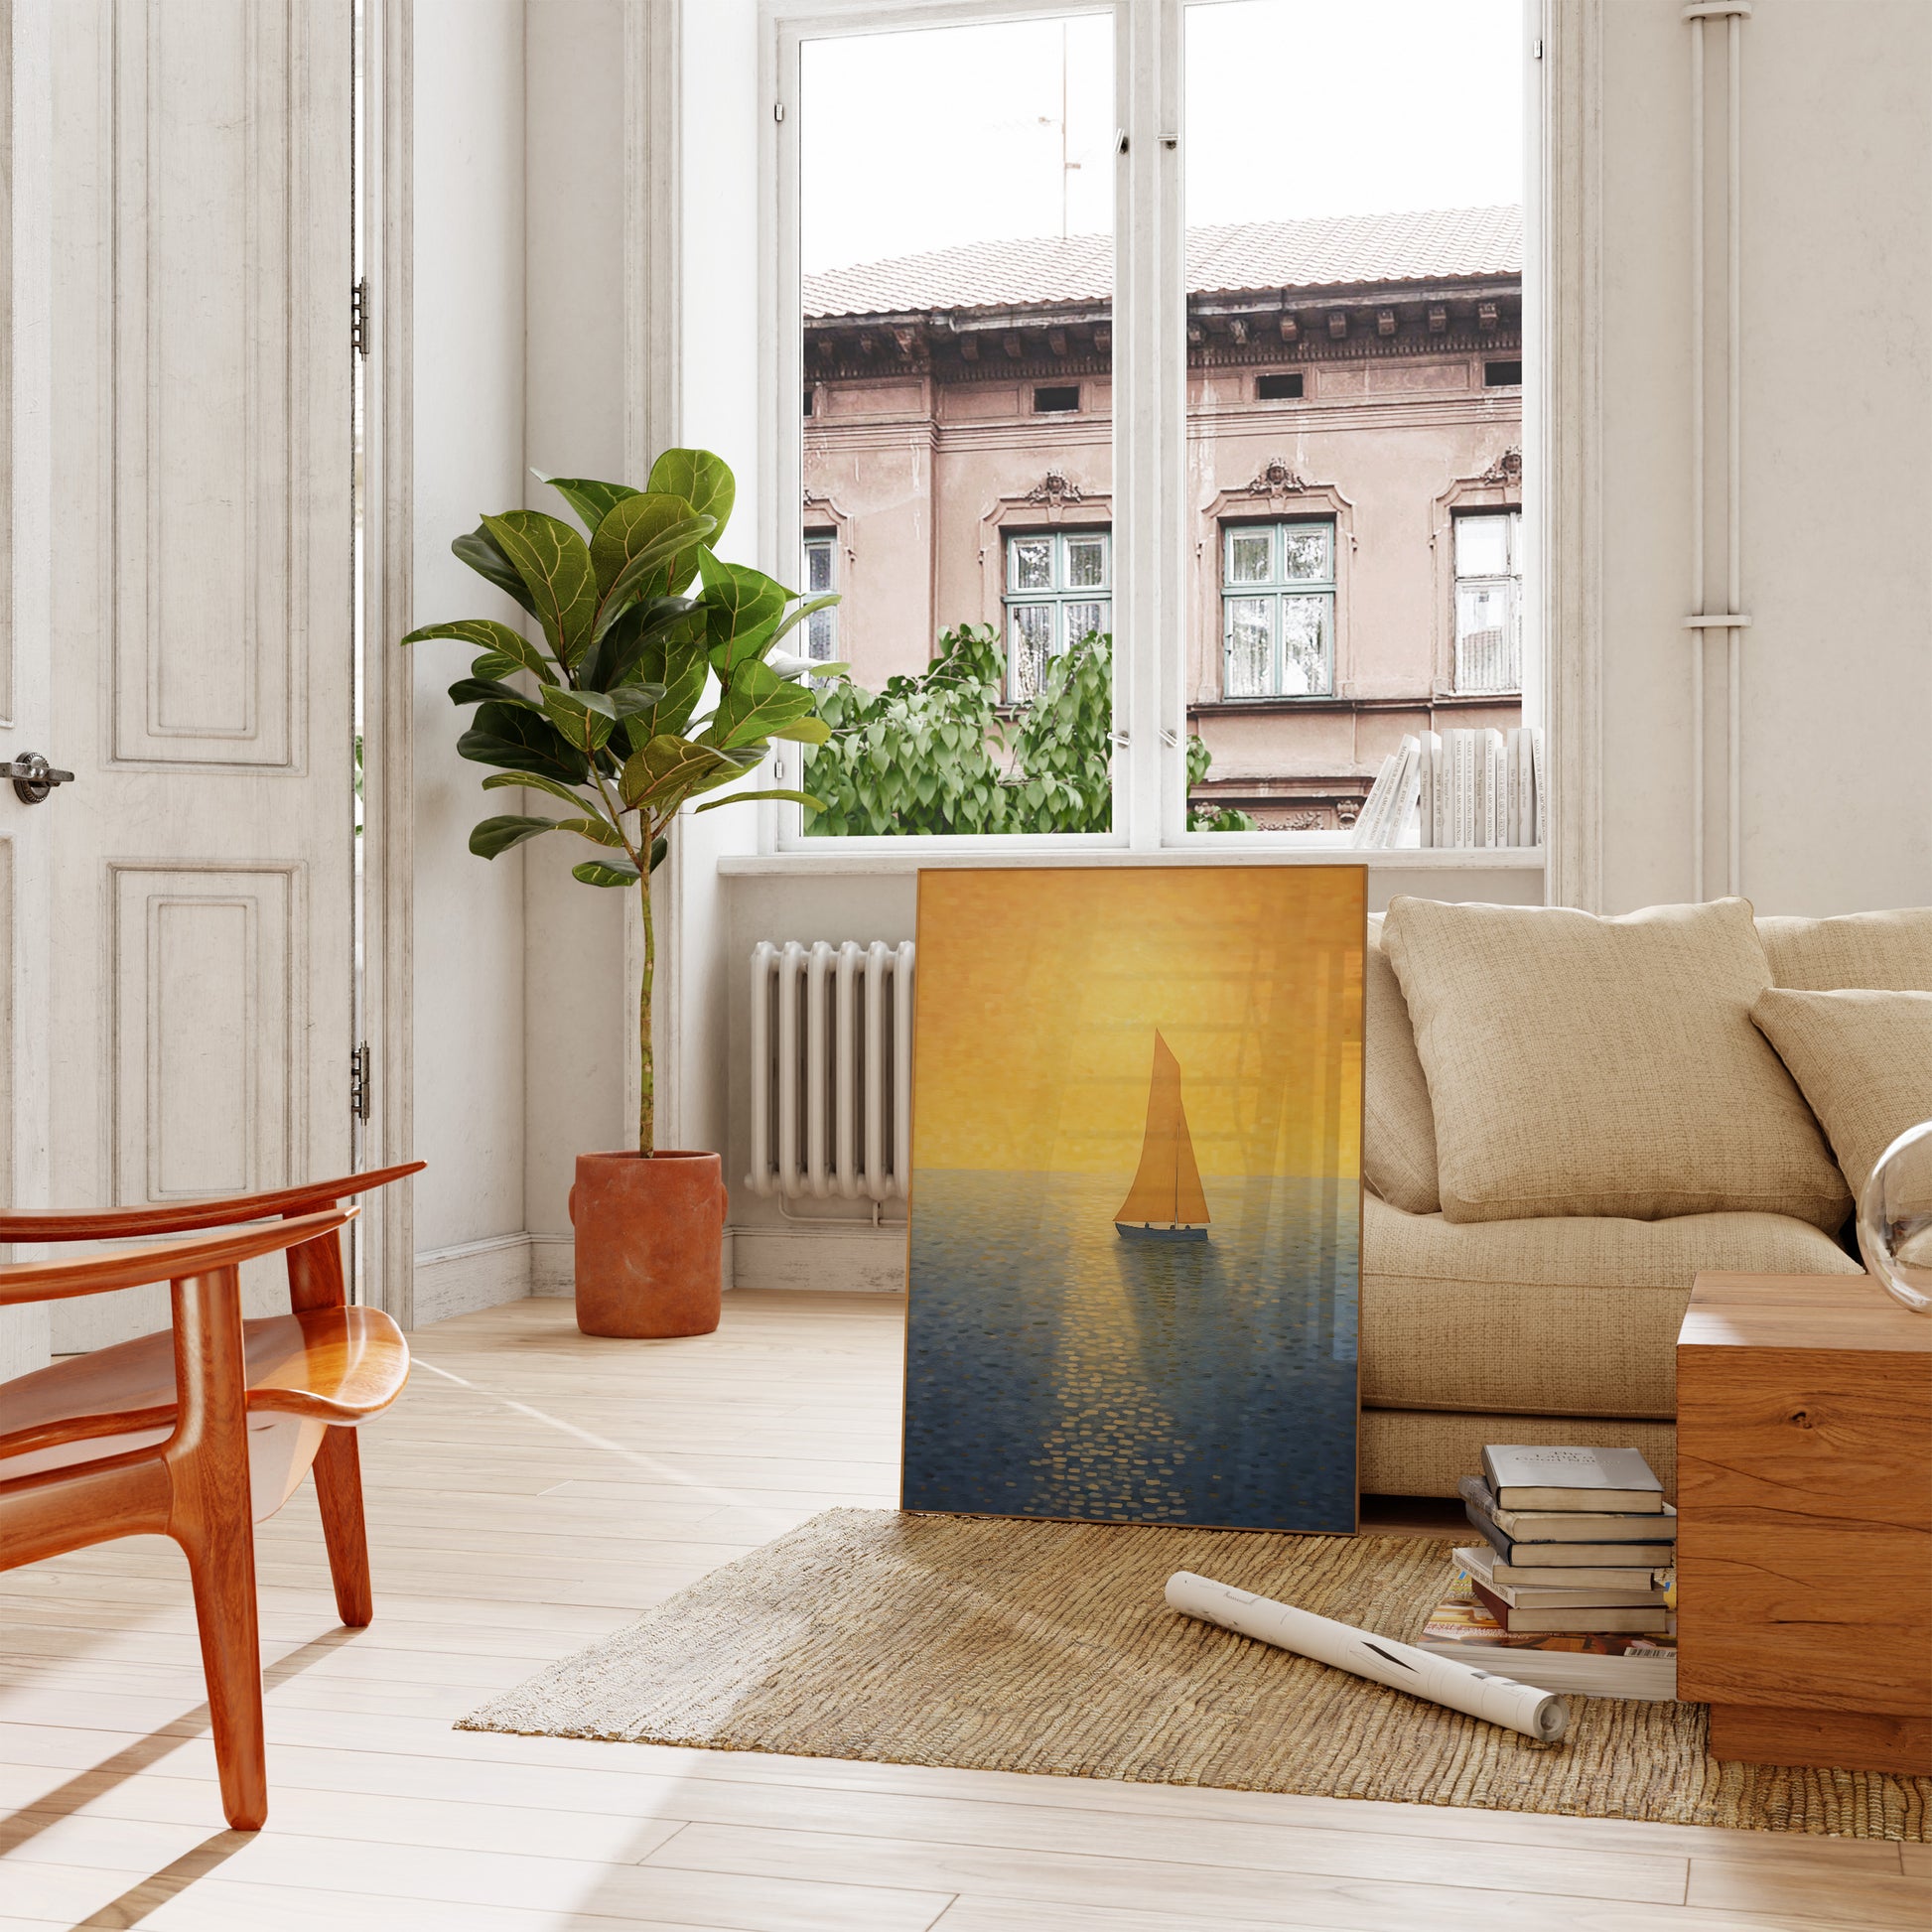 A cozy living room interior with a painting of a sailboat, a sofa, and a houseplant.